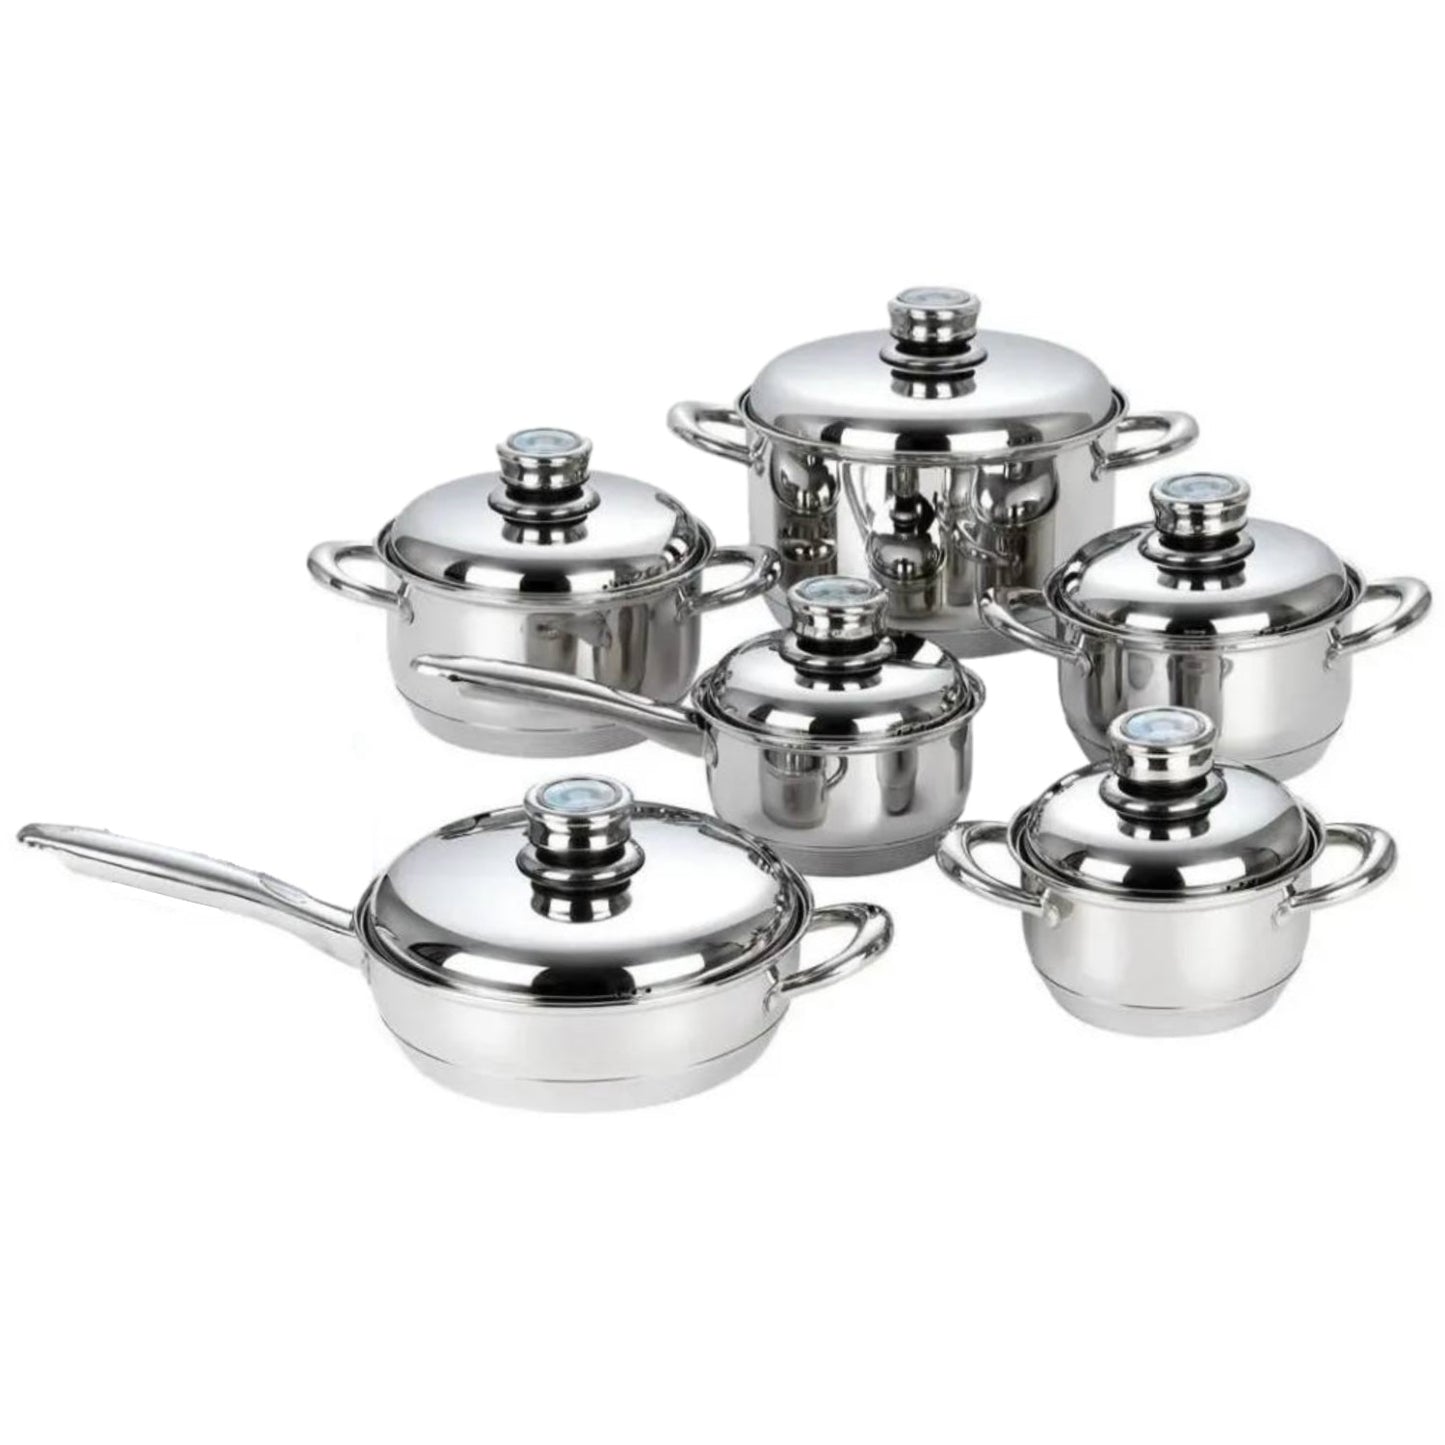 12 PC Stainless Steel Cookware Set